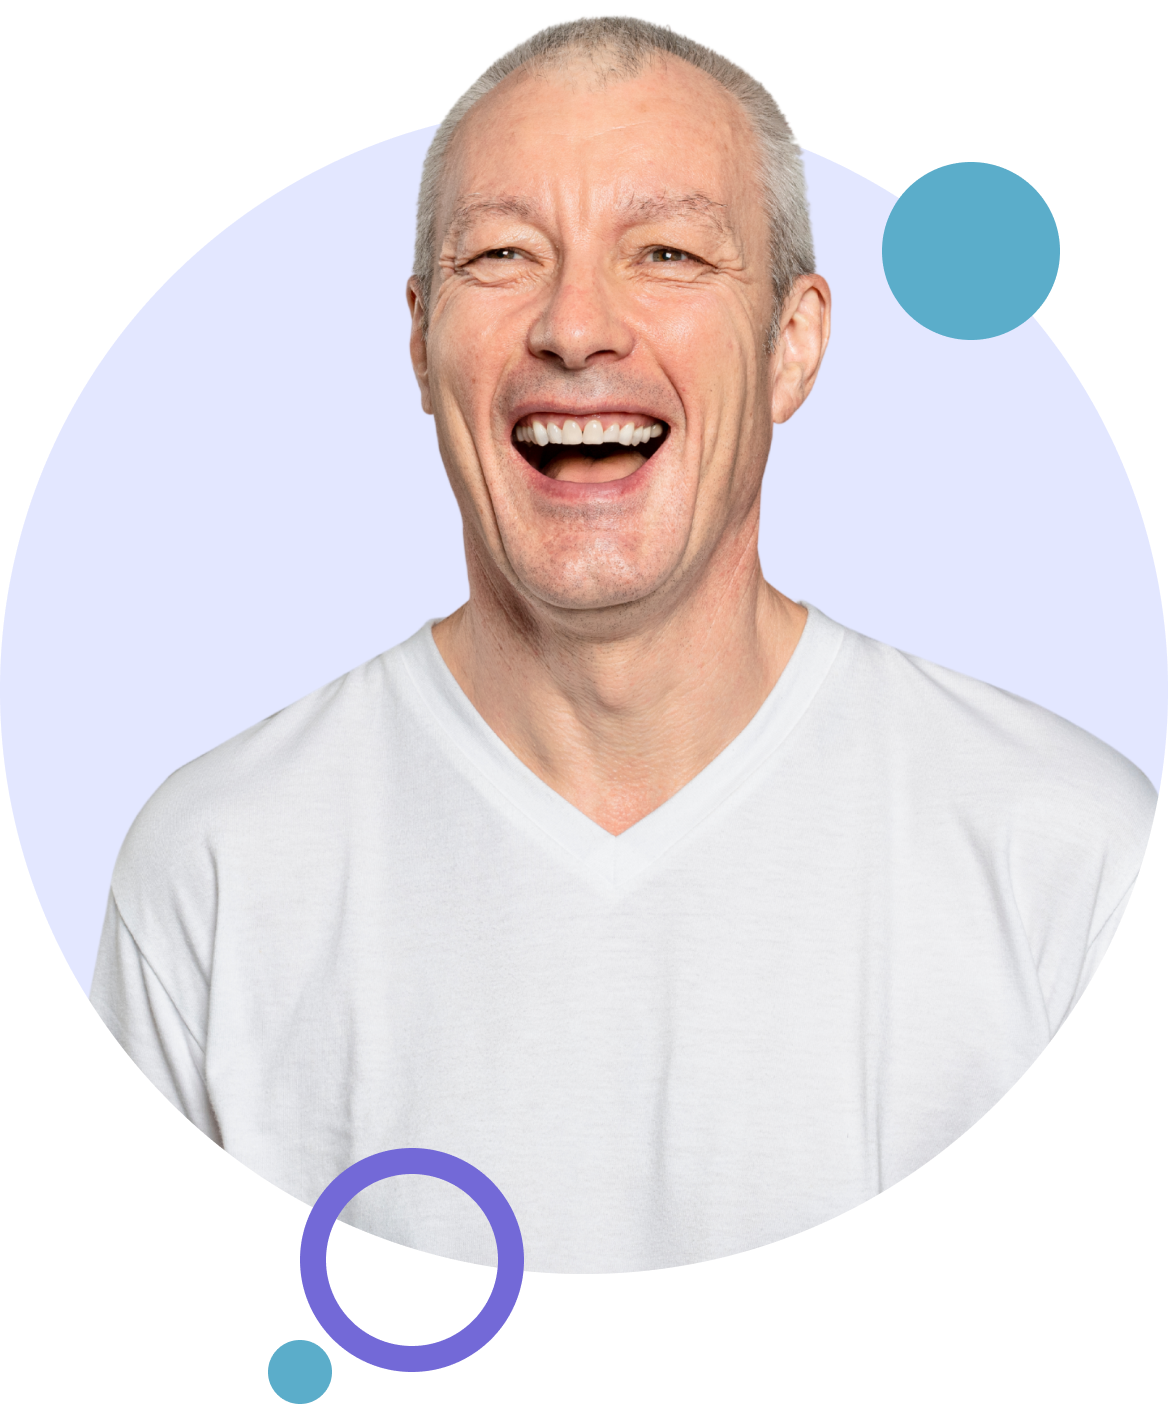 Middle aged man smiling with dental implants